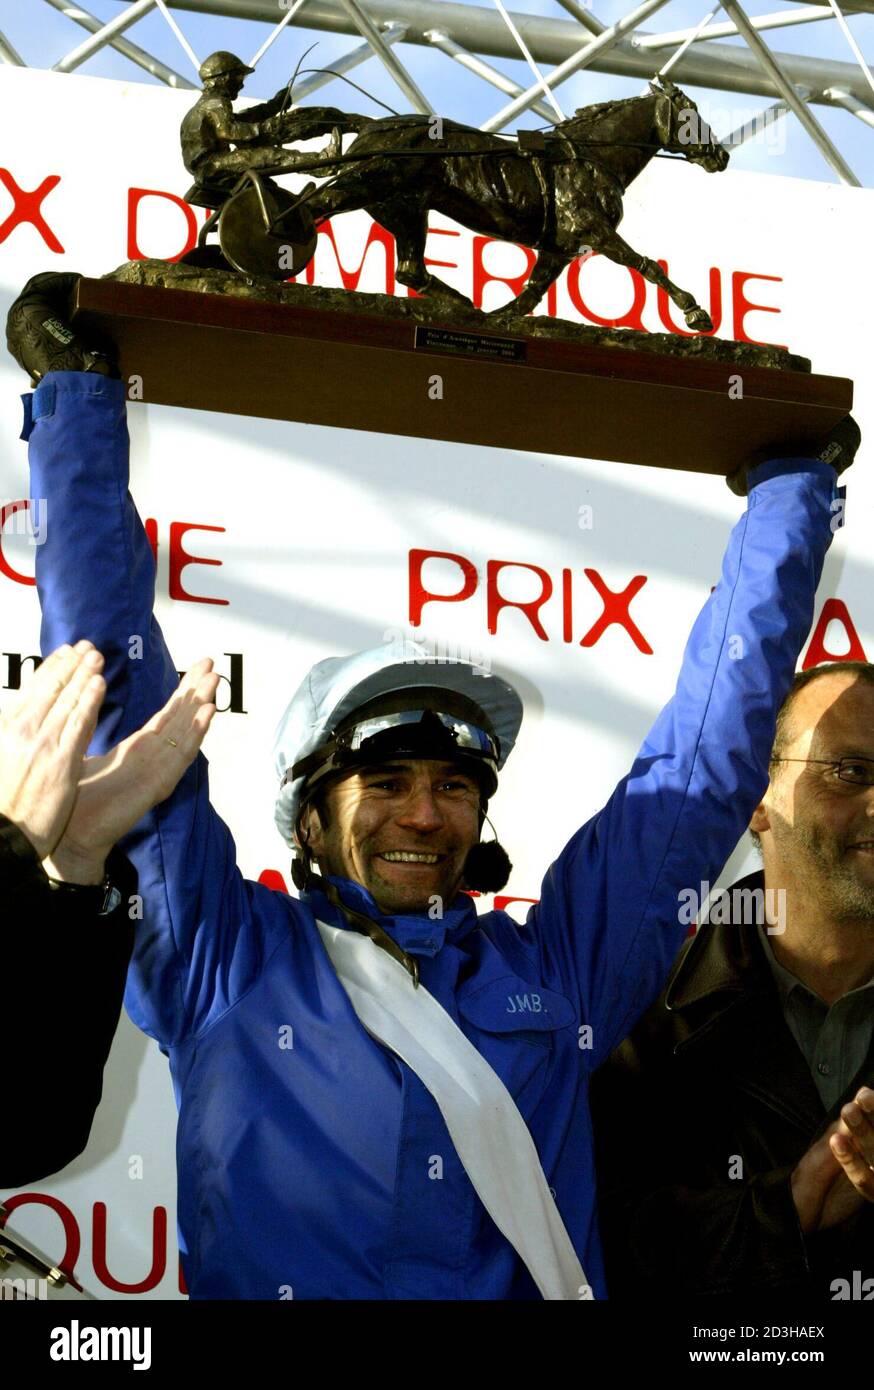 FRENCH JOCKEY JEAN-MICHEL BAZIRE DRIVING KESACO PHADO HOLDS HIS TROPHY  AFTER WINNING THE PRIX D'AMERIQUE RACE. French jockey Jean-Michel Bazire  driving Kesaco Phedo, holds his trophy after winning the Prix d'Amerique  harness